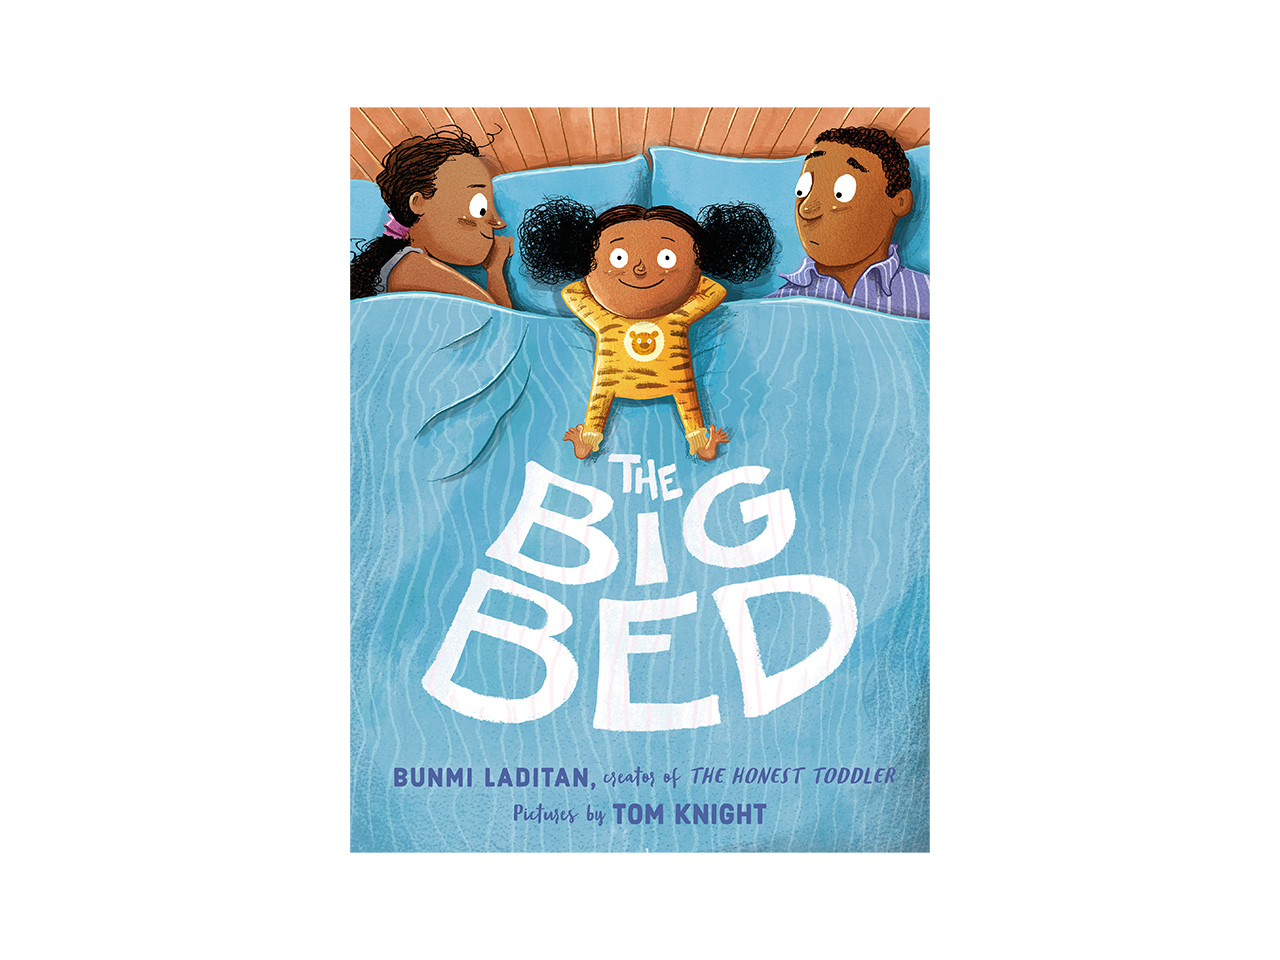 Cover art for the book, The Big Bed. Shows a little girl in striped pajamas sleeping between her parents